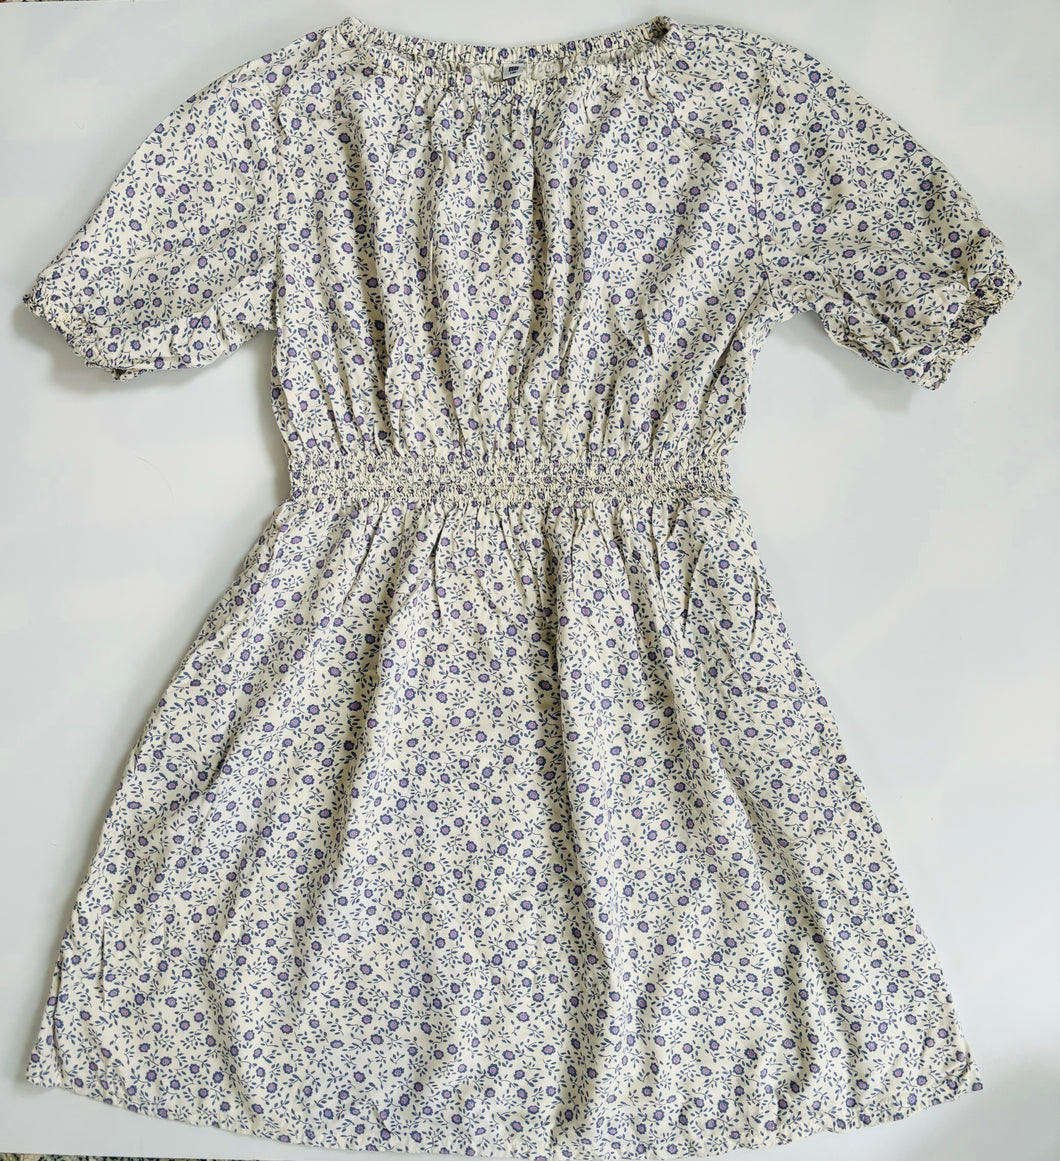 Floral Dress with Pockets, 130 (6-7 years) // Uniqlo